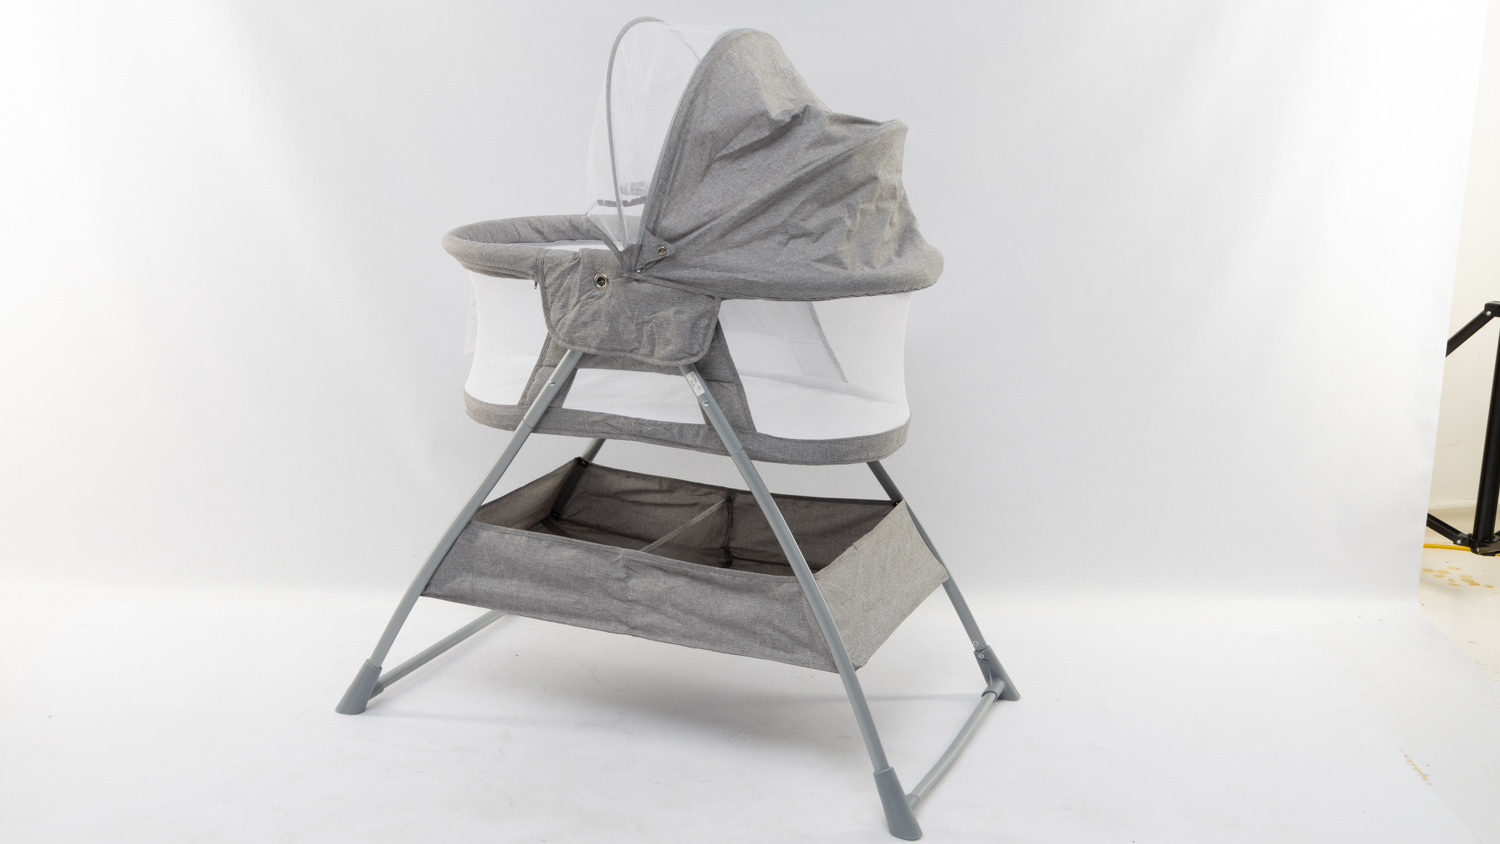 Kmart Anko Bassinet with Canopy carousel image